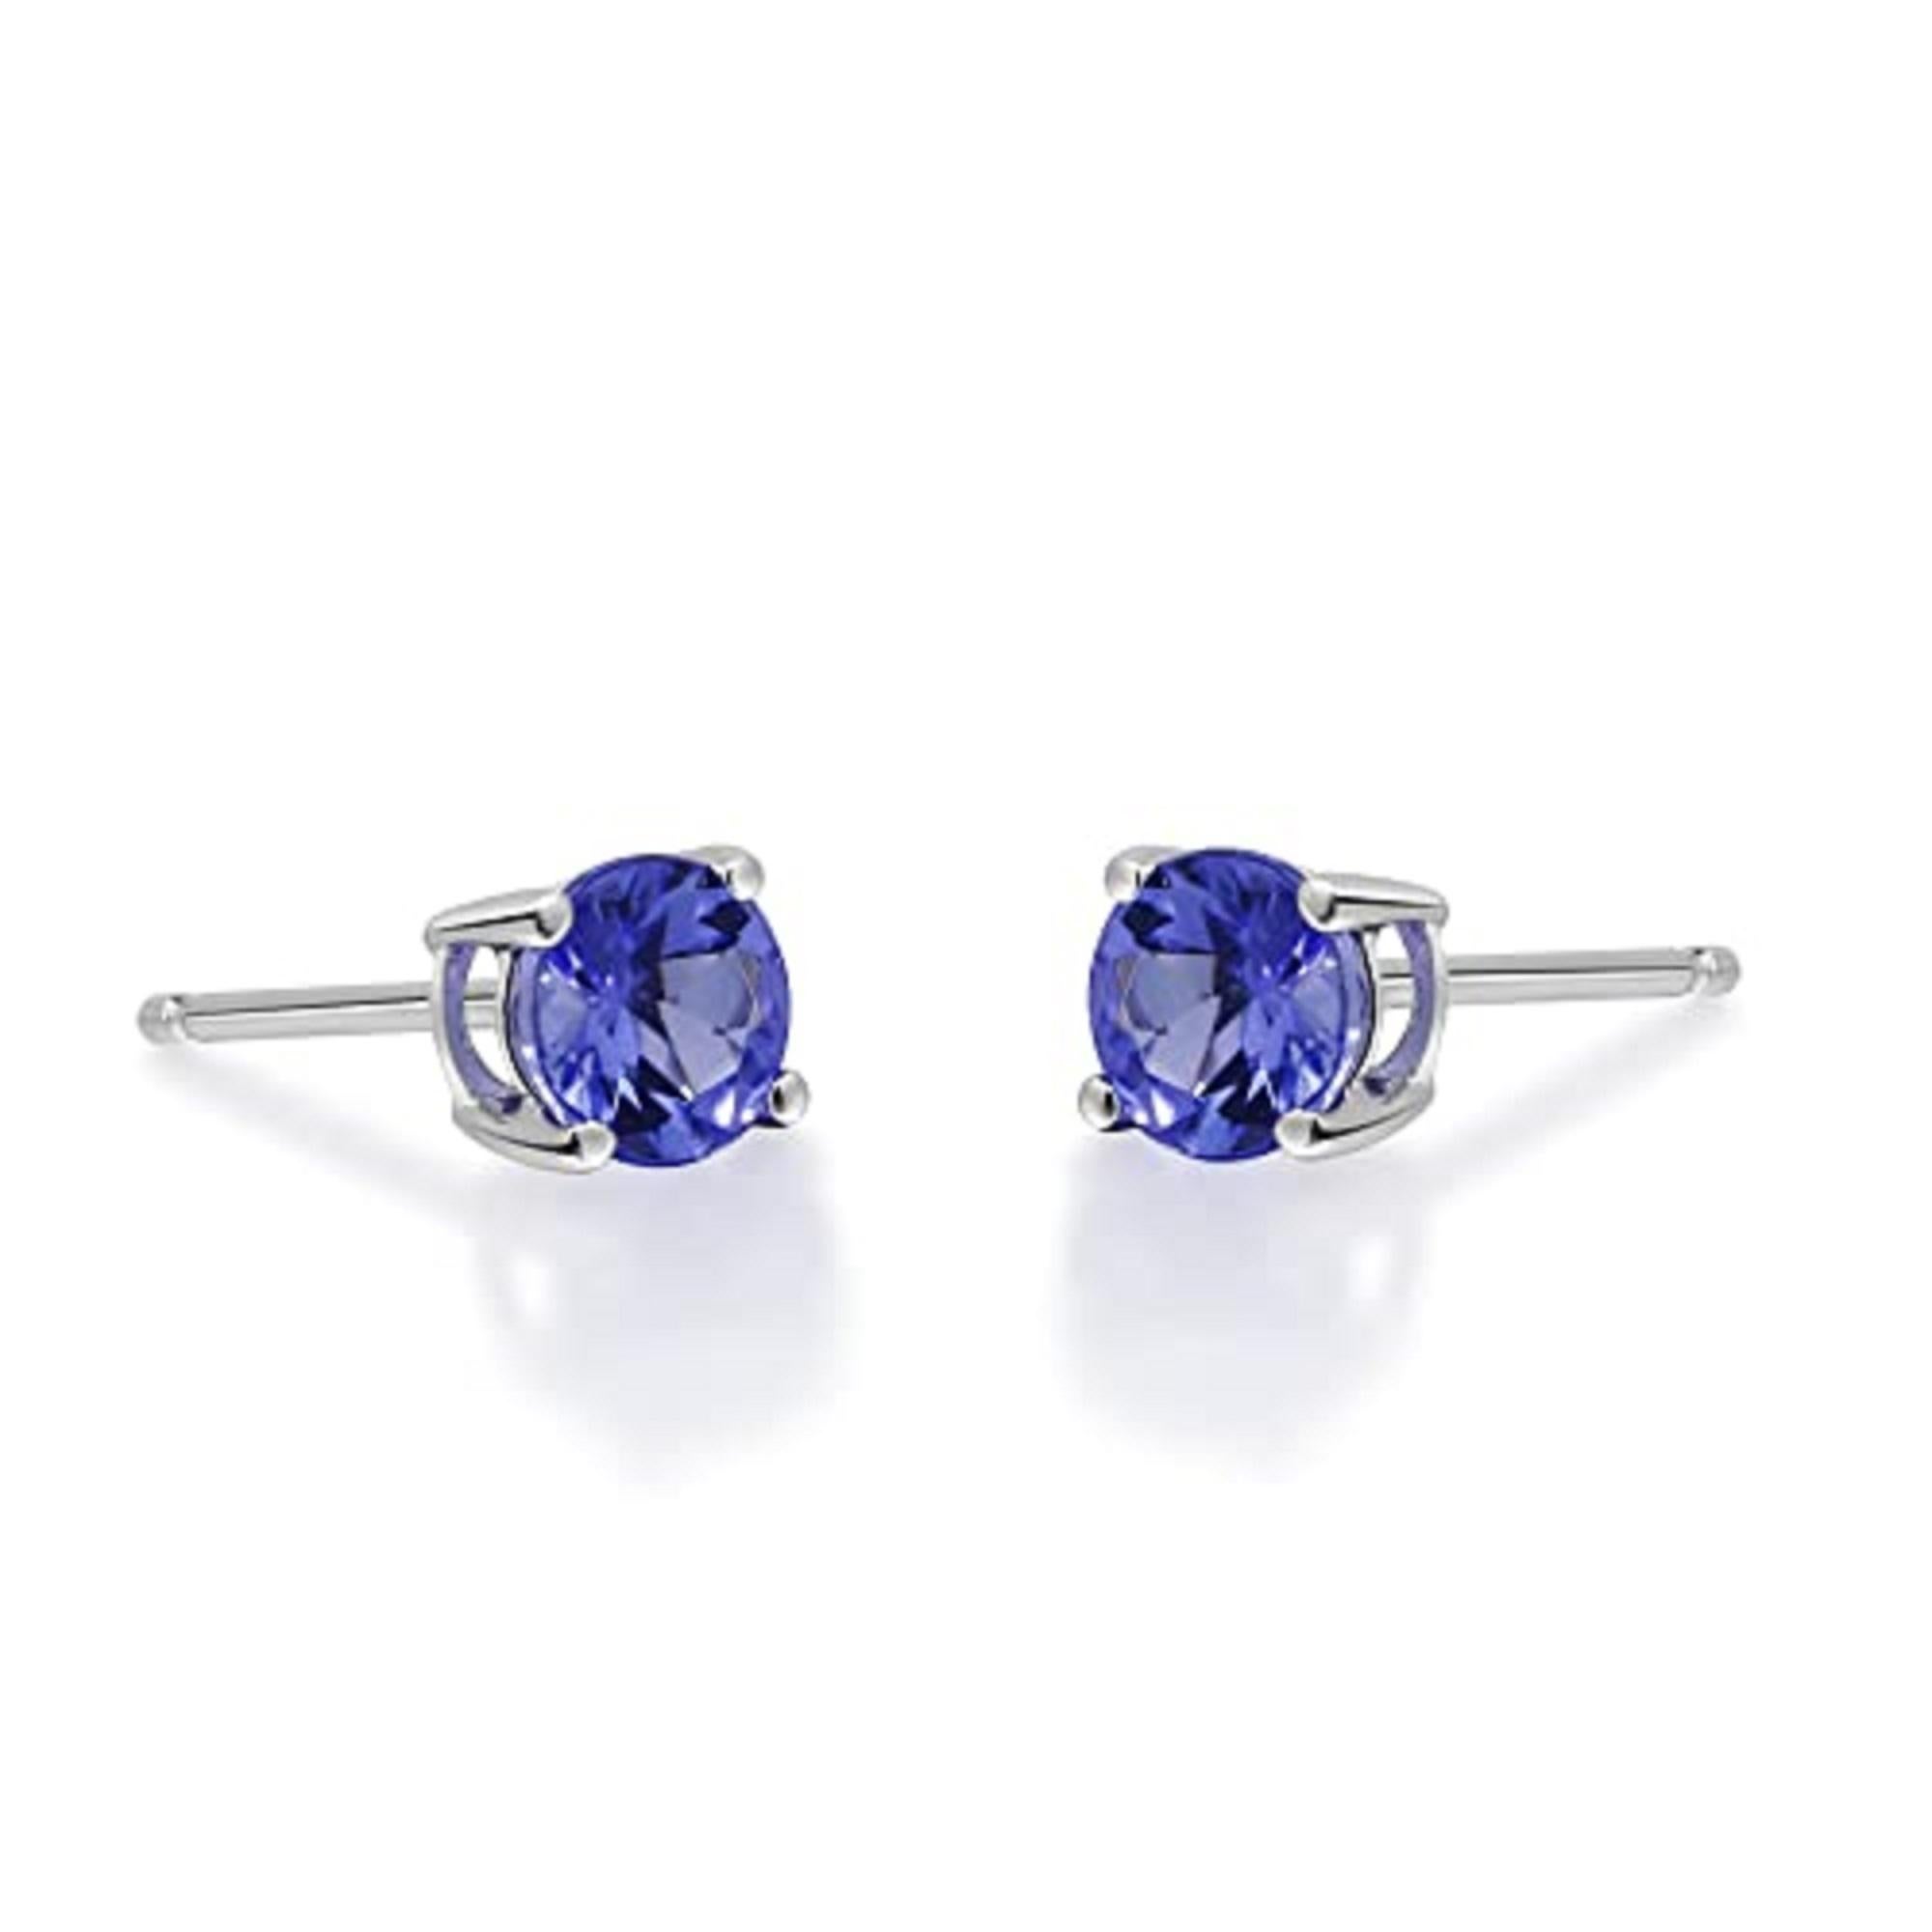 Round Cut 1.02 Carat Round-Cut Tanzanite 925 Sterling Silver Stud Earring For Sale